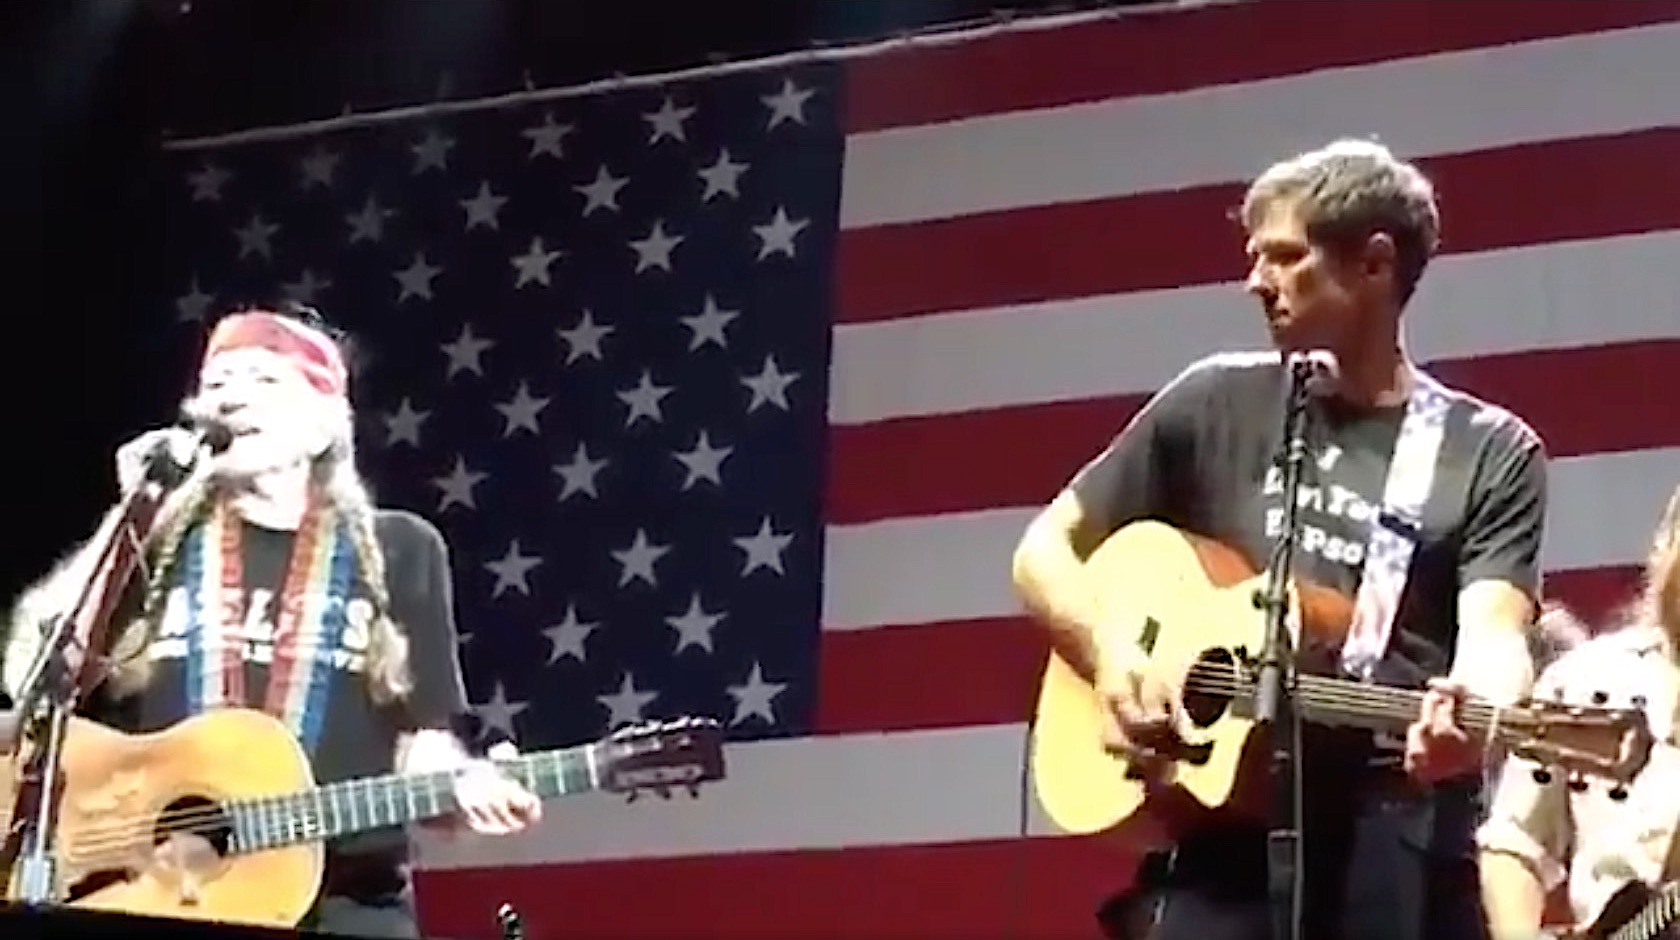 Rep. Beto ORourke jams with Willie Nelson